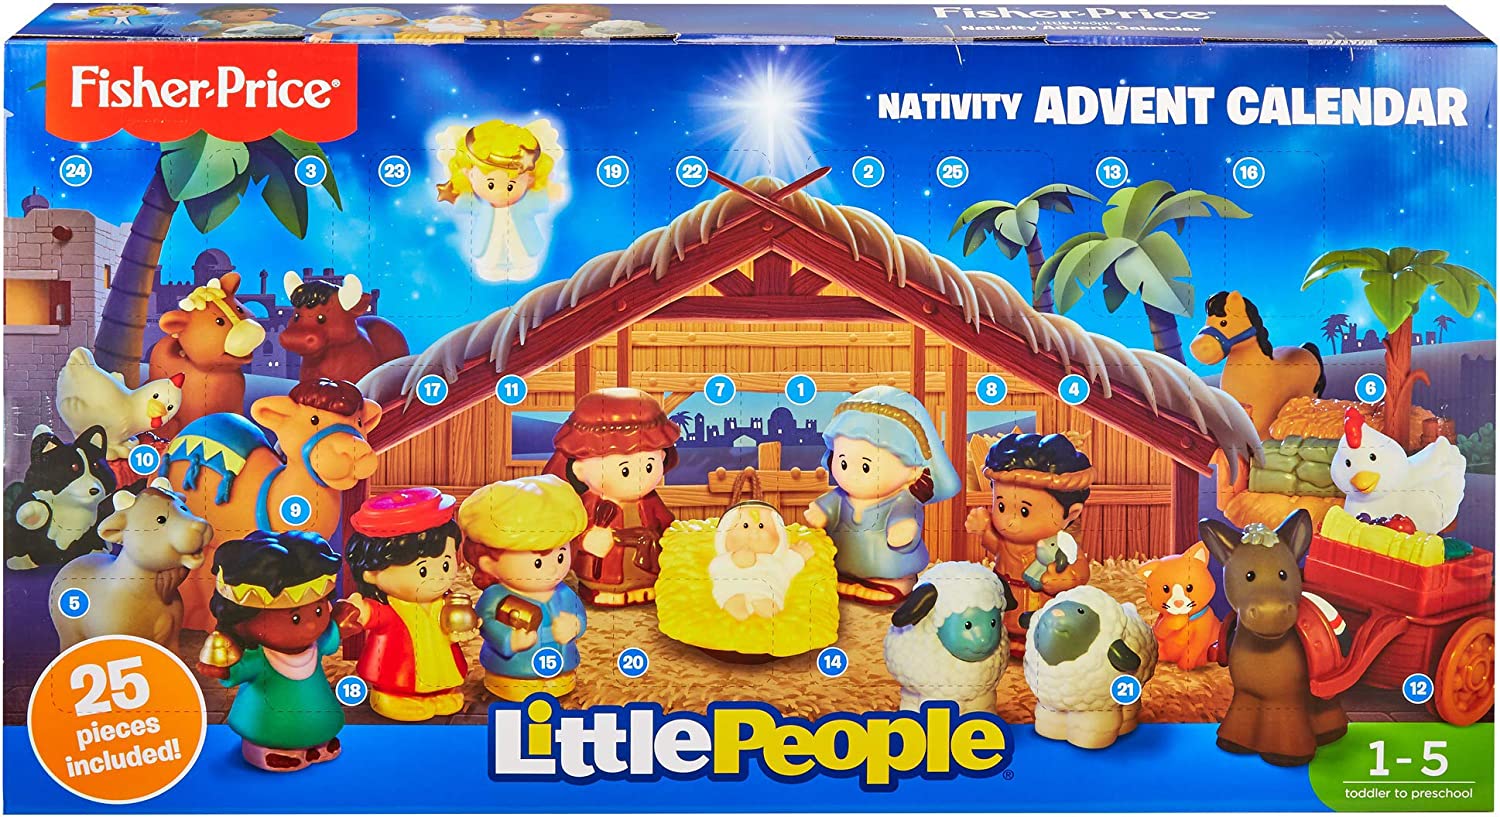 FisherPrice Little People Advent Calendar Reviews Get All The Details